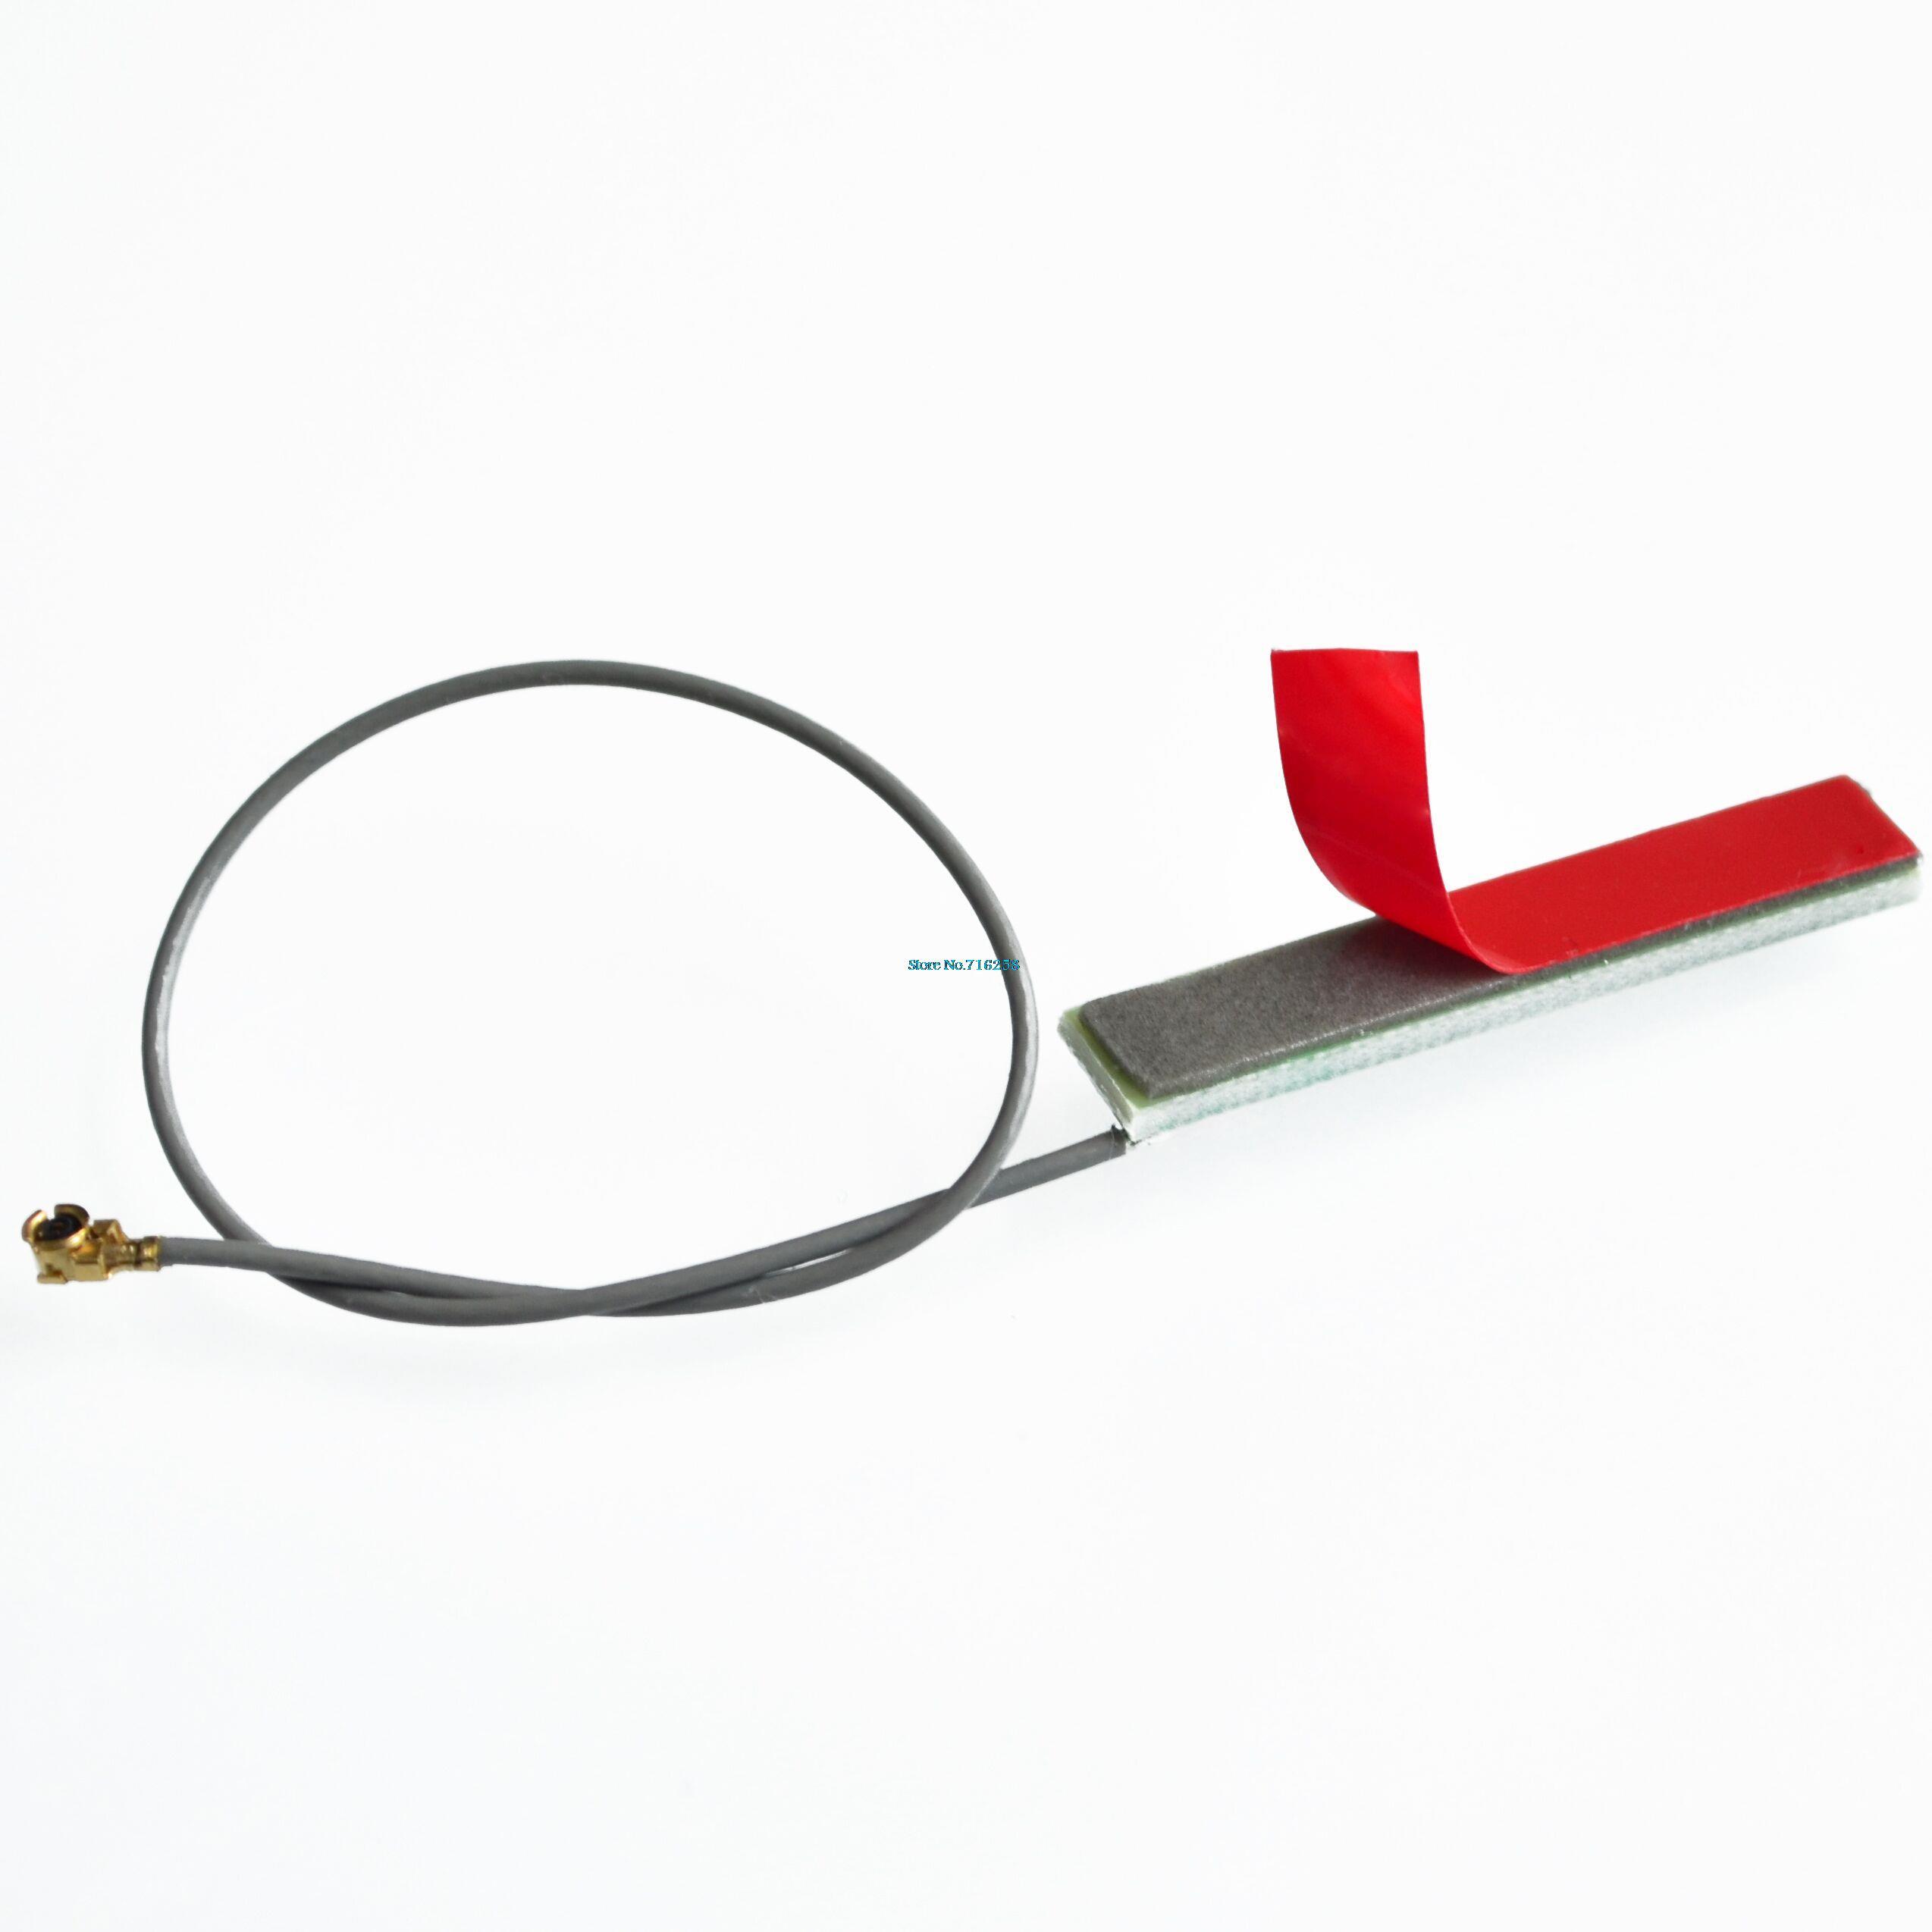 GSM-GPRS-3G-built-in-circuit-board-antenna-1-13-line-15cm-long-IPEX-connector-3DBI-PCB-small-antenna